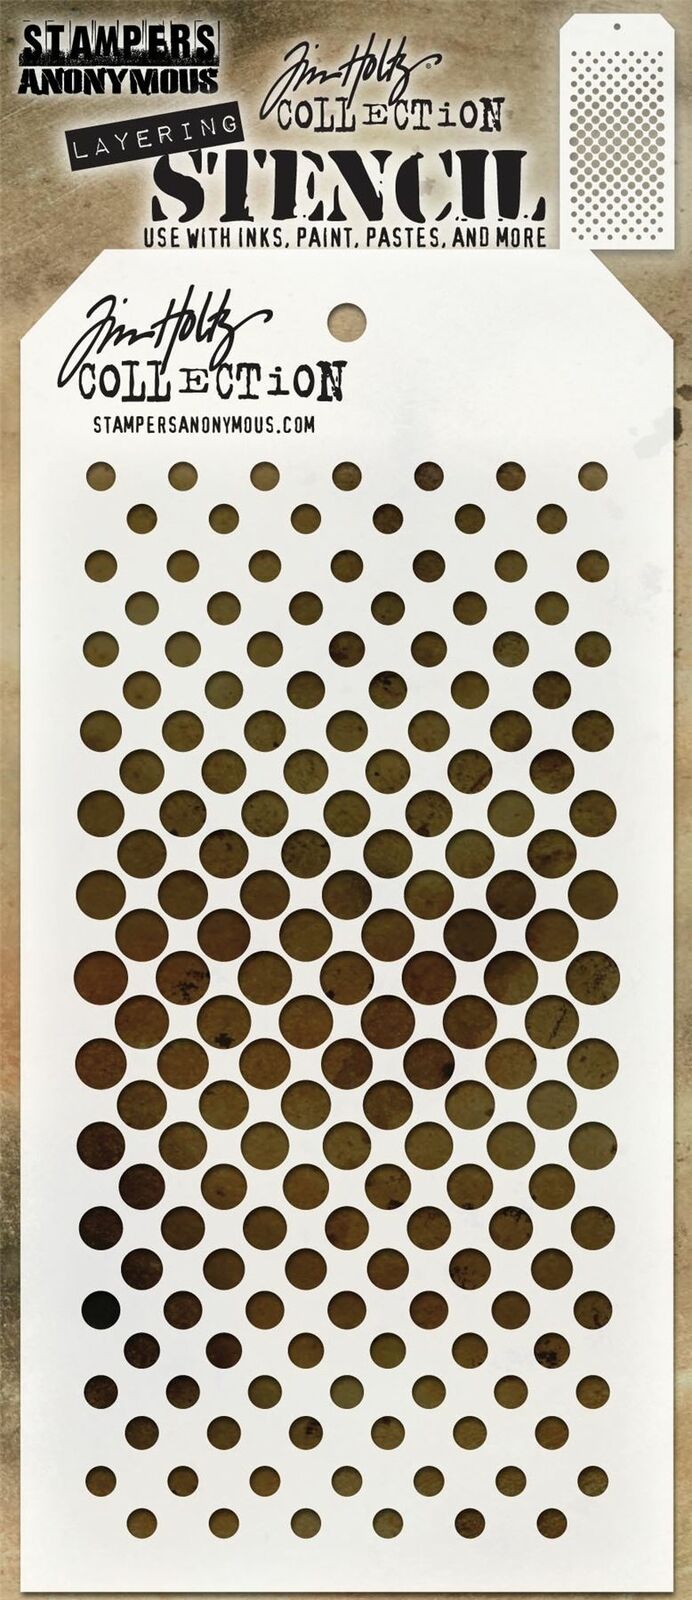 Stampers Anonymous Tim Holtz Layering Stencil - Gradient Dot